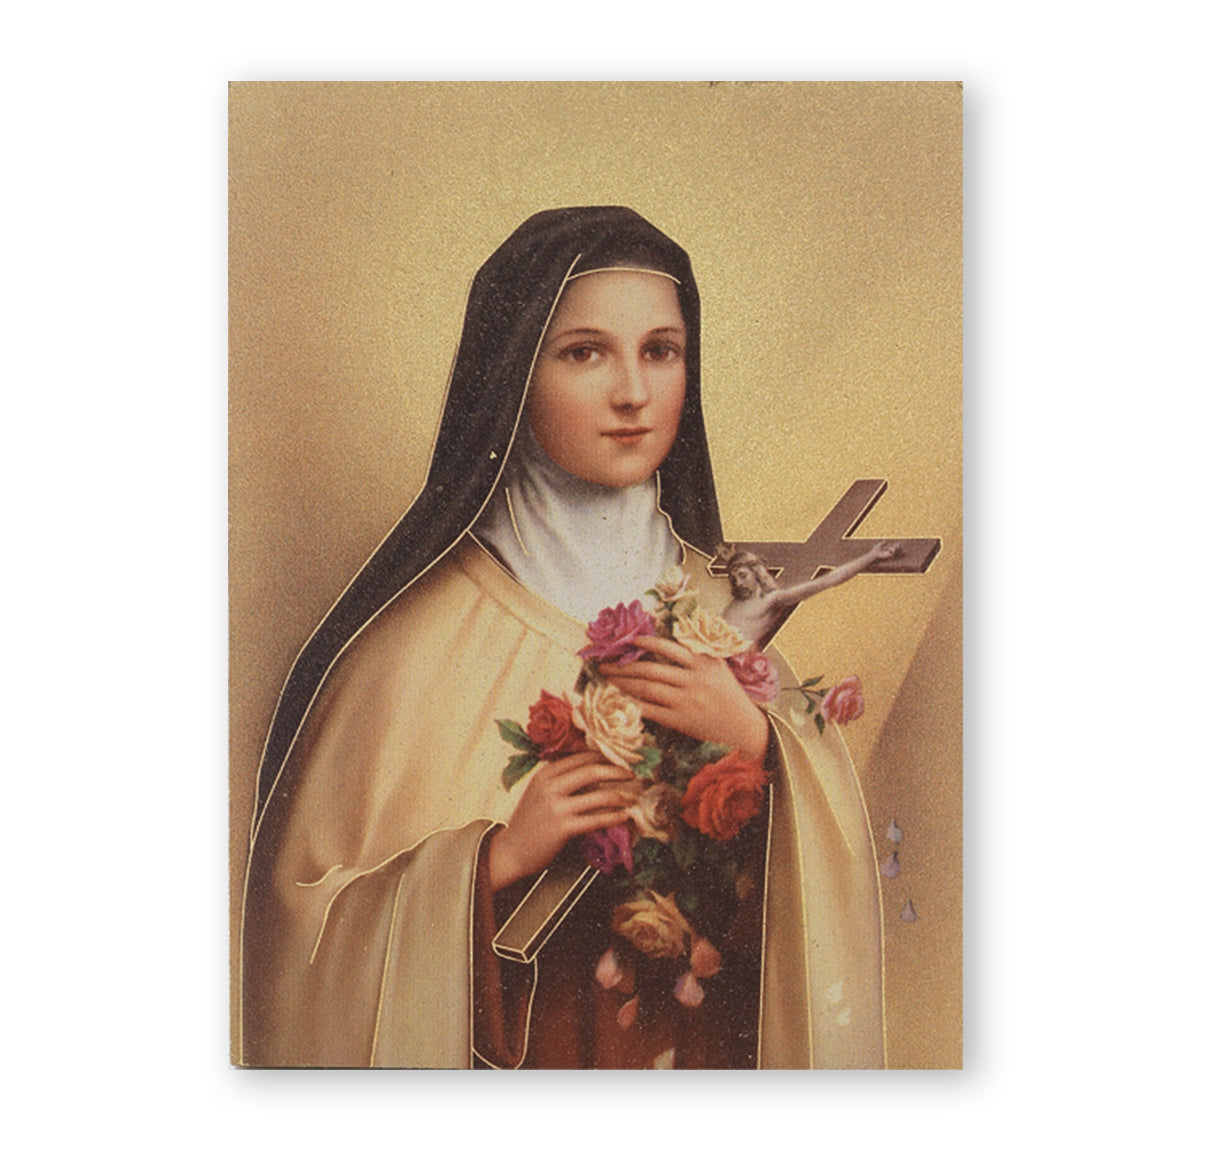 St. Therese Textured Wood